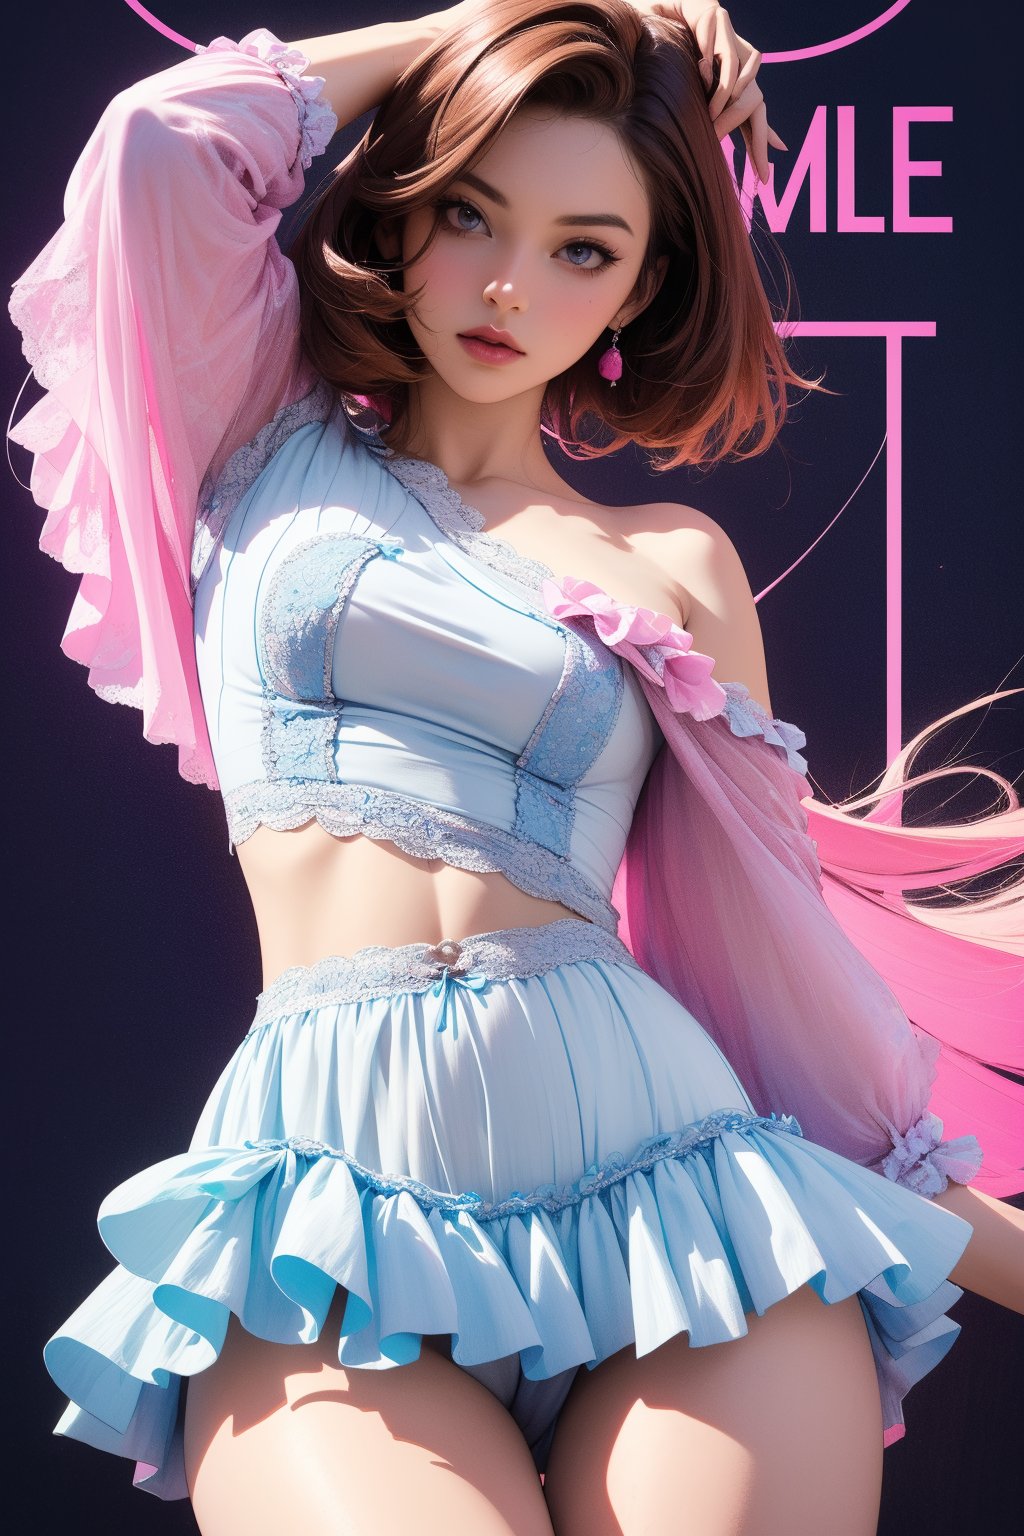 1girl, Charlie Kyrn, looking at viewer, thigh up body, soft_rock idol, styled outfit, on stage, professional lighting, red-orange-magenta-pink-blue-purple-fuchsia-cyan hair, different hairstyle, coloful, magazine cover, best quality, masterpiece,johyun,kmiu,Charlie Kyrn,Brown Hair